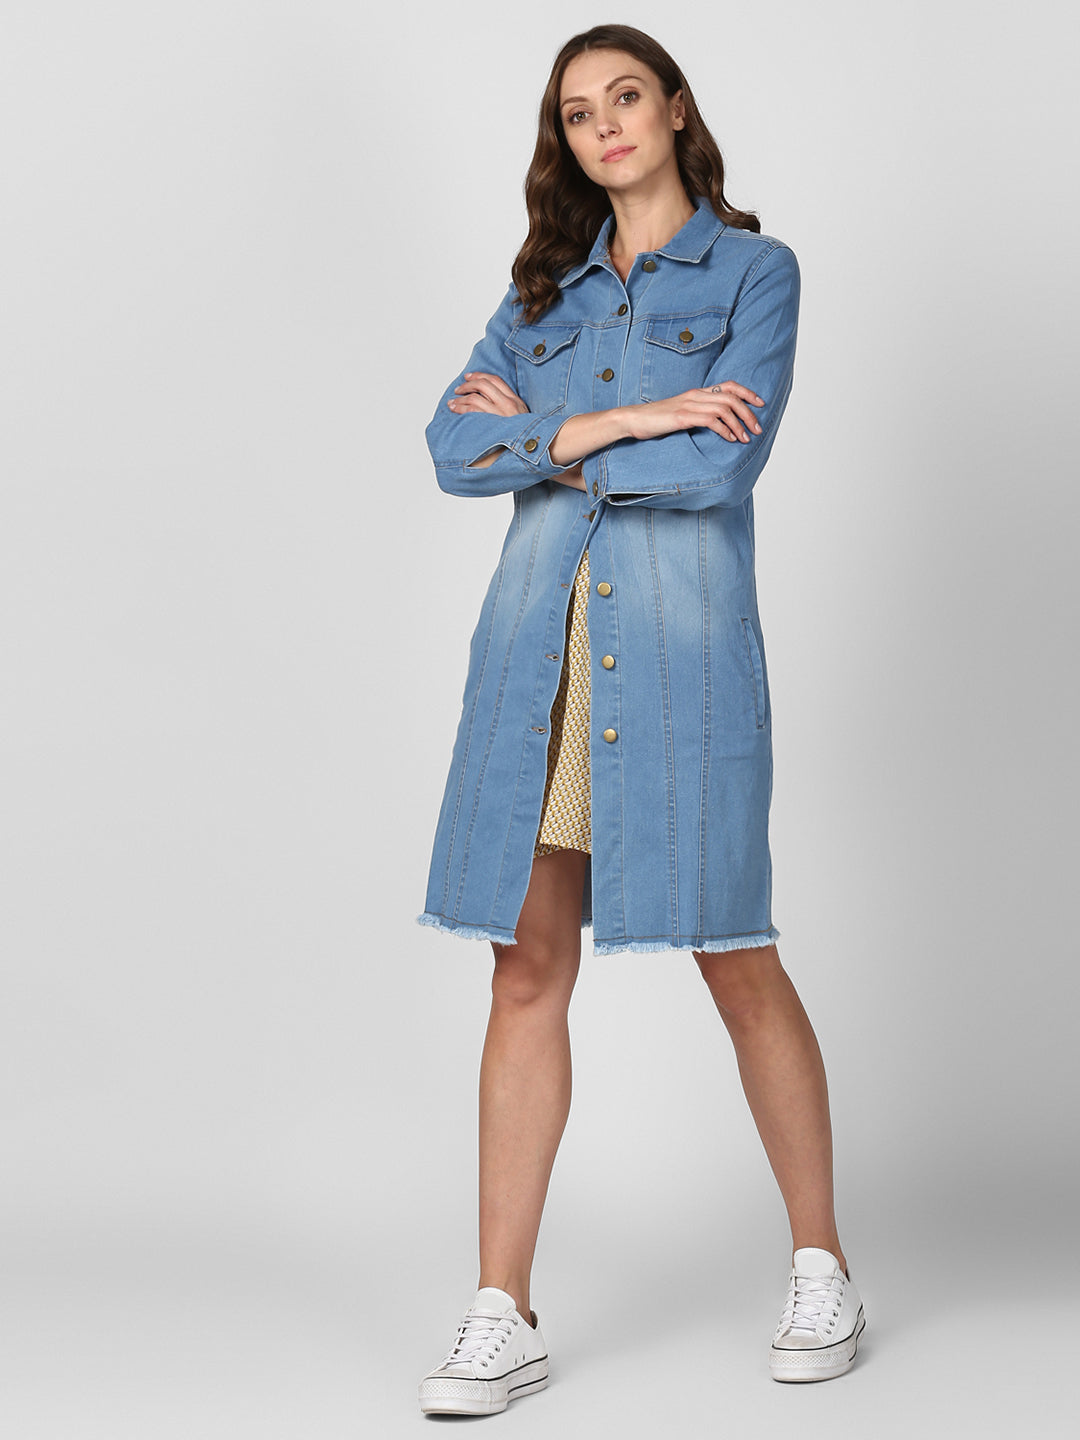 Women's Ice Blue Long Overcoat Style Denim Jacket with Washed effect